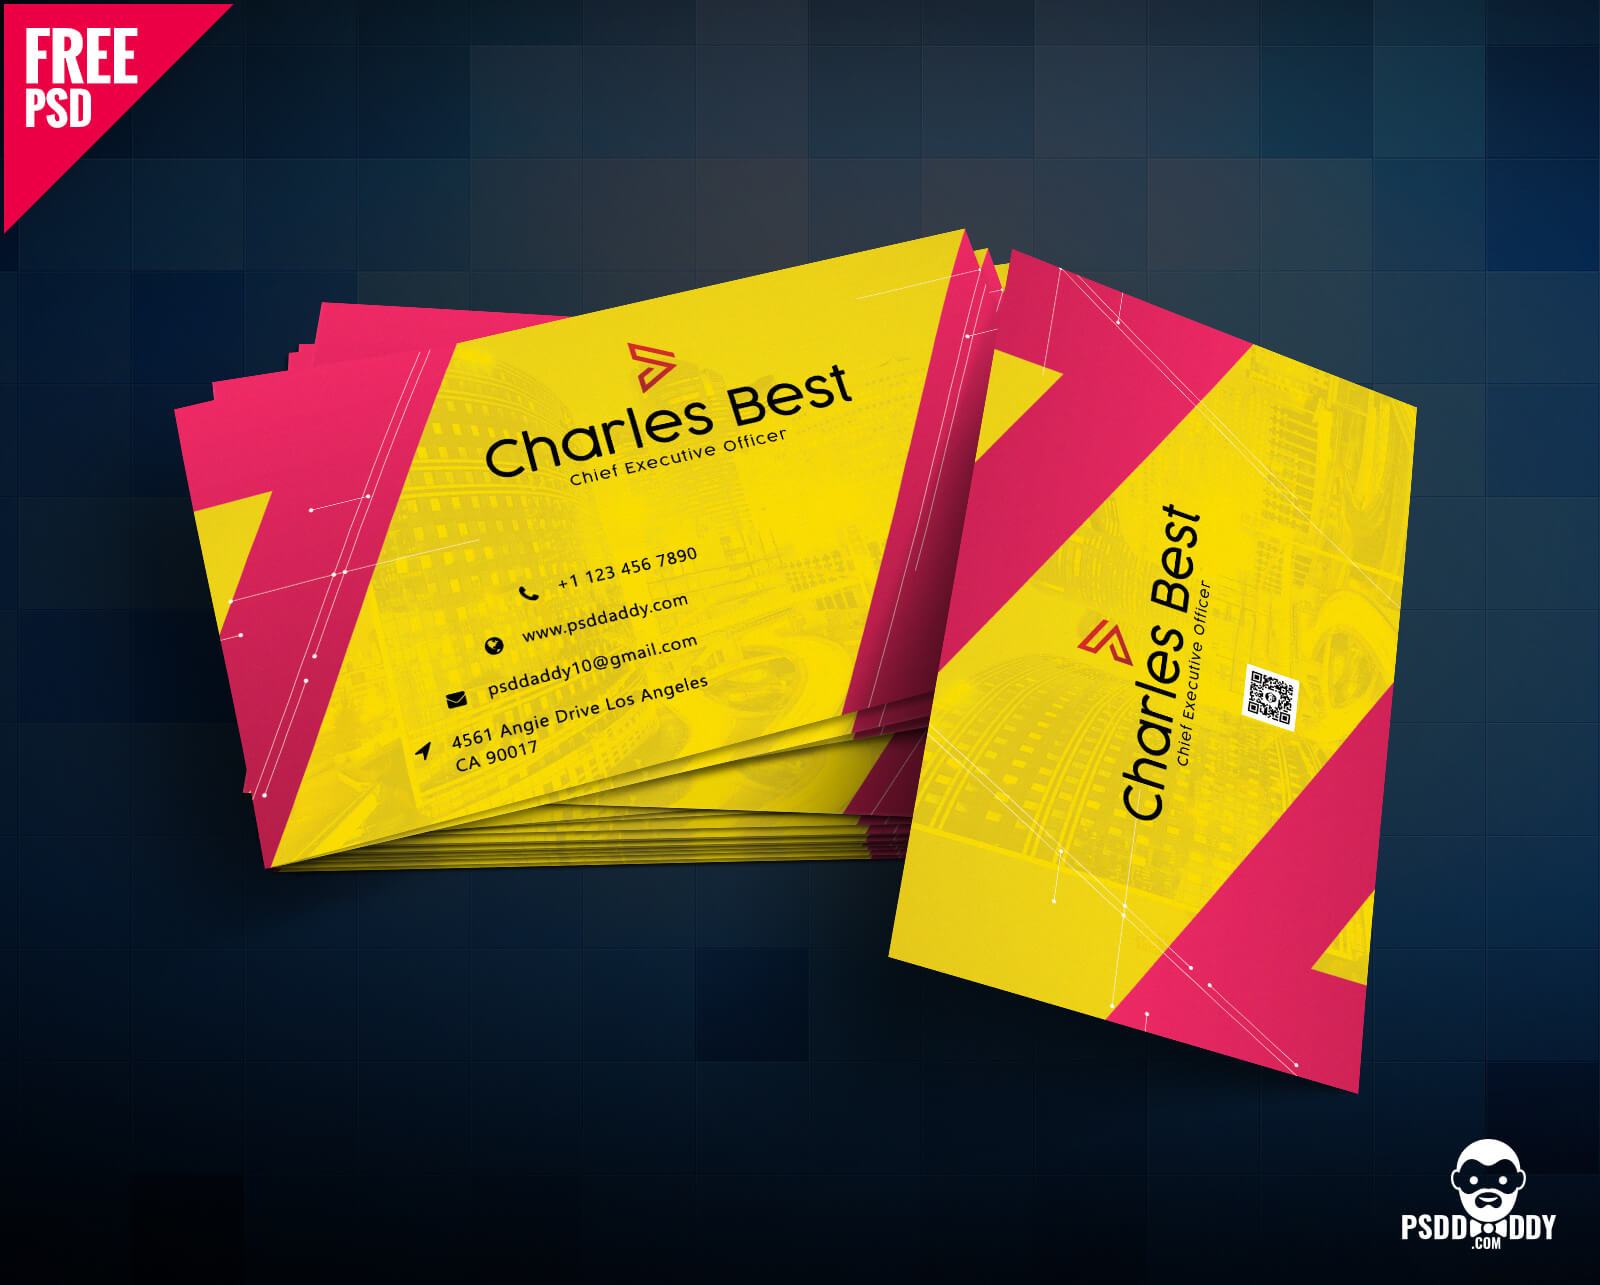 Download] Creative Business Card Free Psd | Psddaddy Pertaining To Photoshop Cs6 Business Card Template